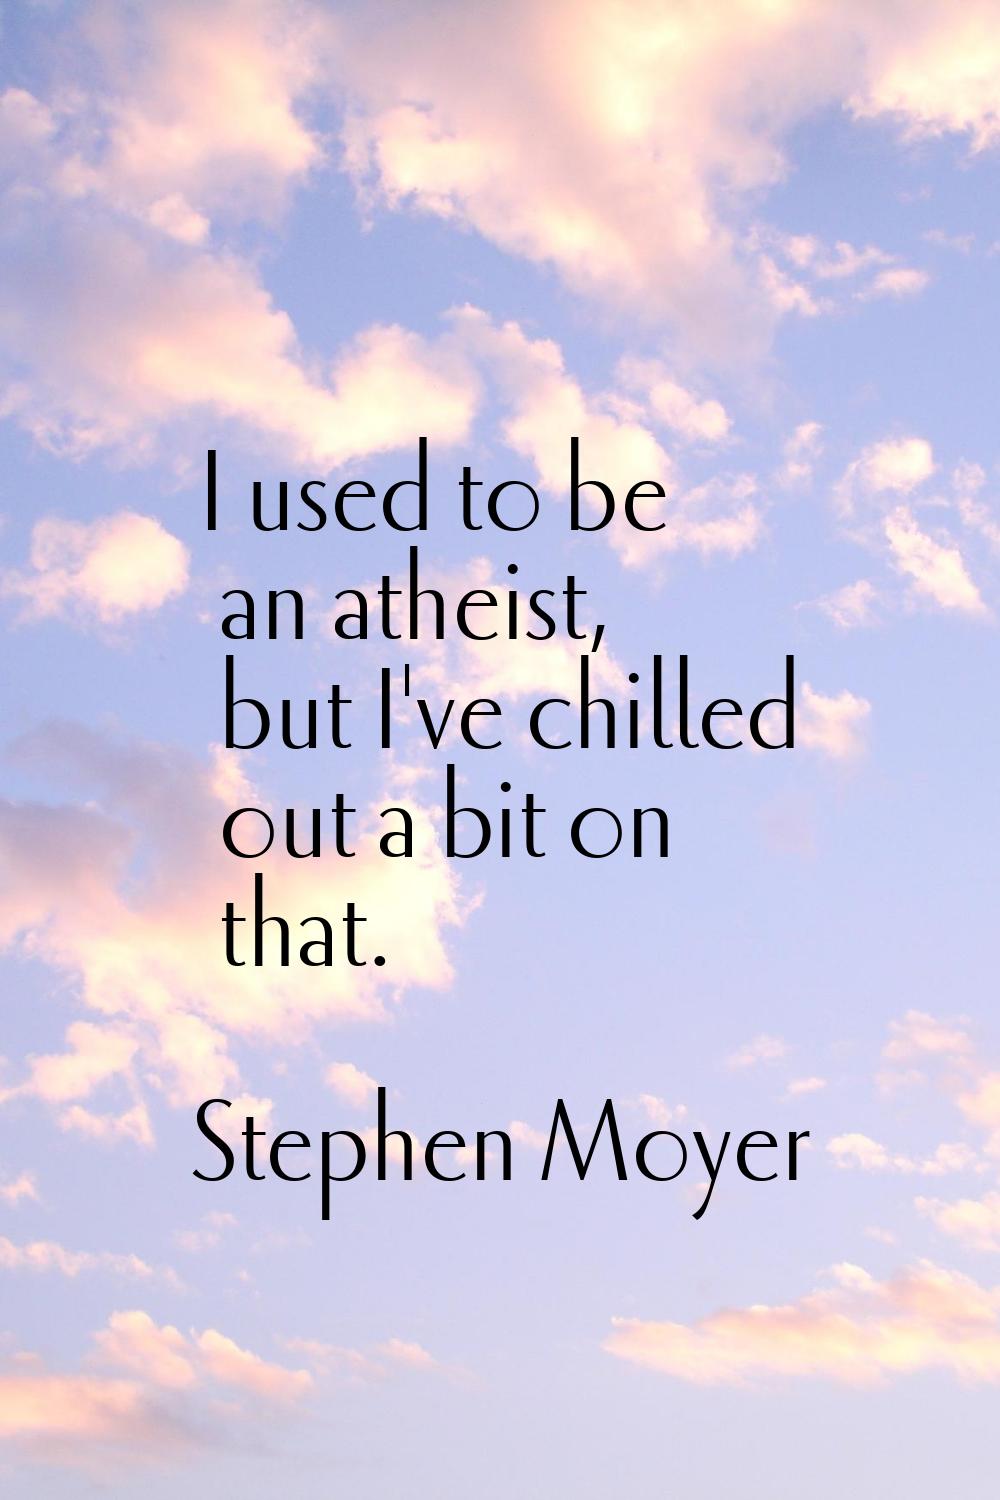 I used to be an atheist, but I've chilled out a bit on that.